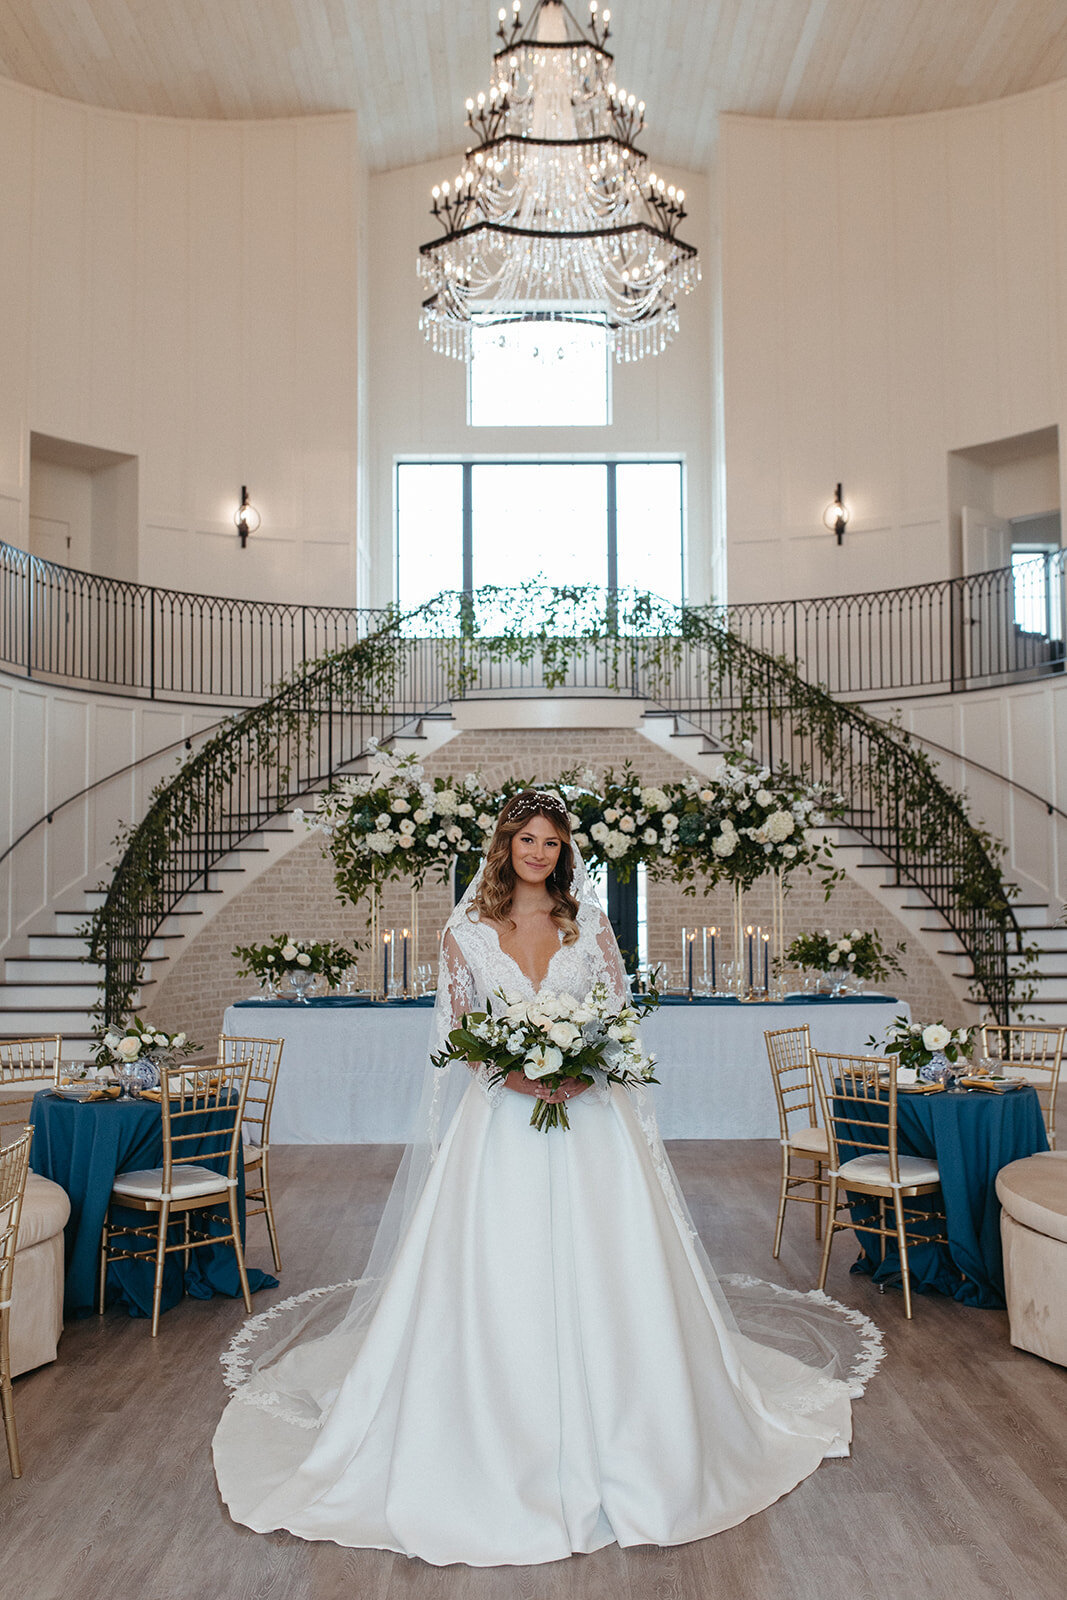 Bride wearing a white wedding gown and veil holding a white bouquet in the middle of a banquet room.